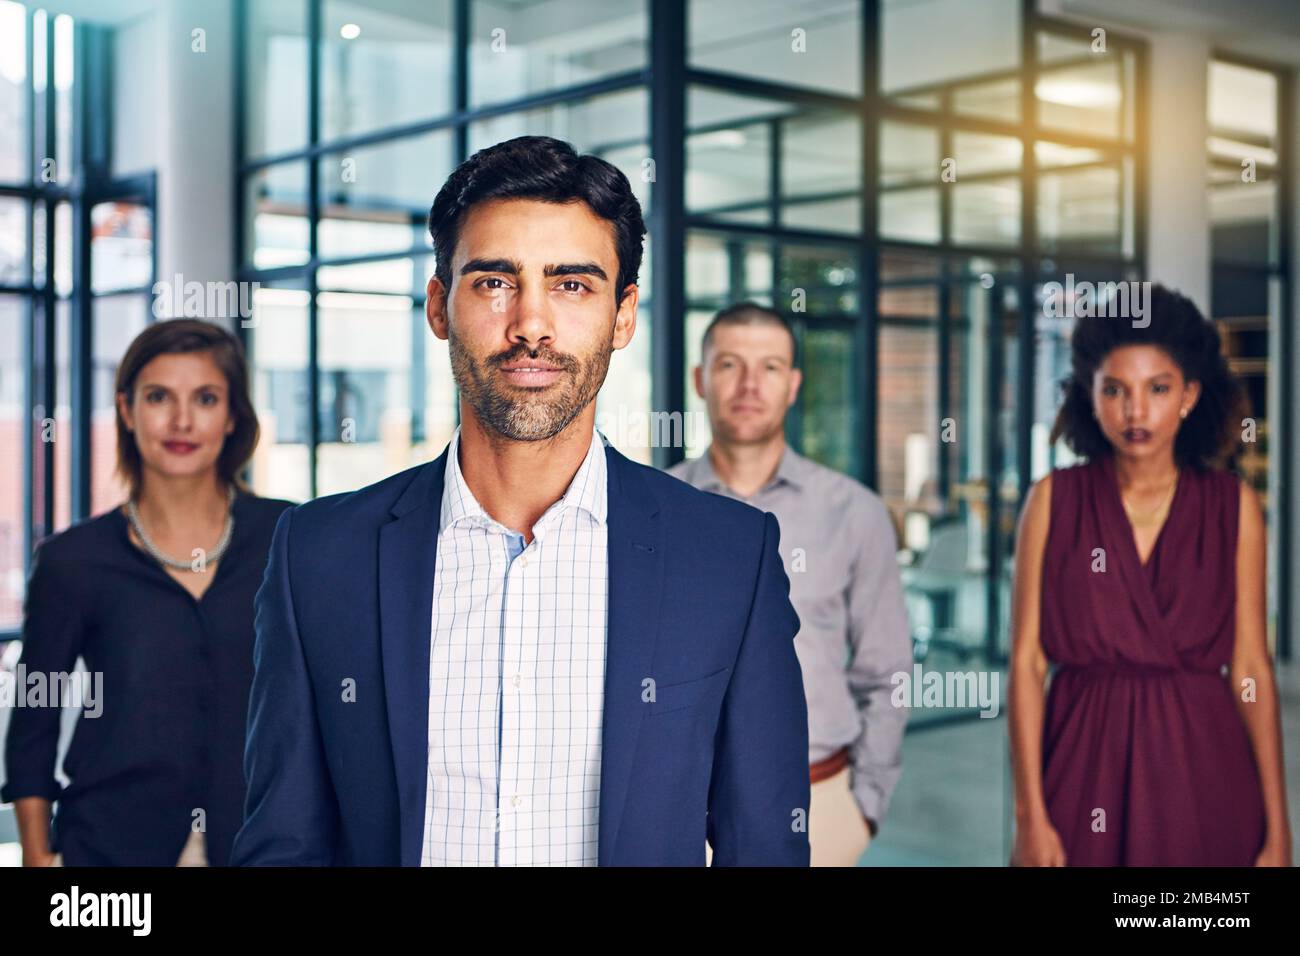 Business people, CEO and group portrait with diversity, businessman leader, vision and career mindset. Management, professional team and collaboration Stock Photo